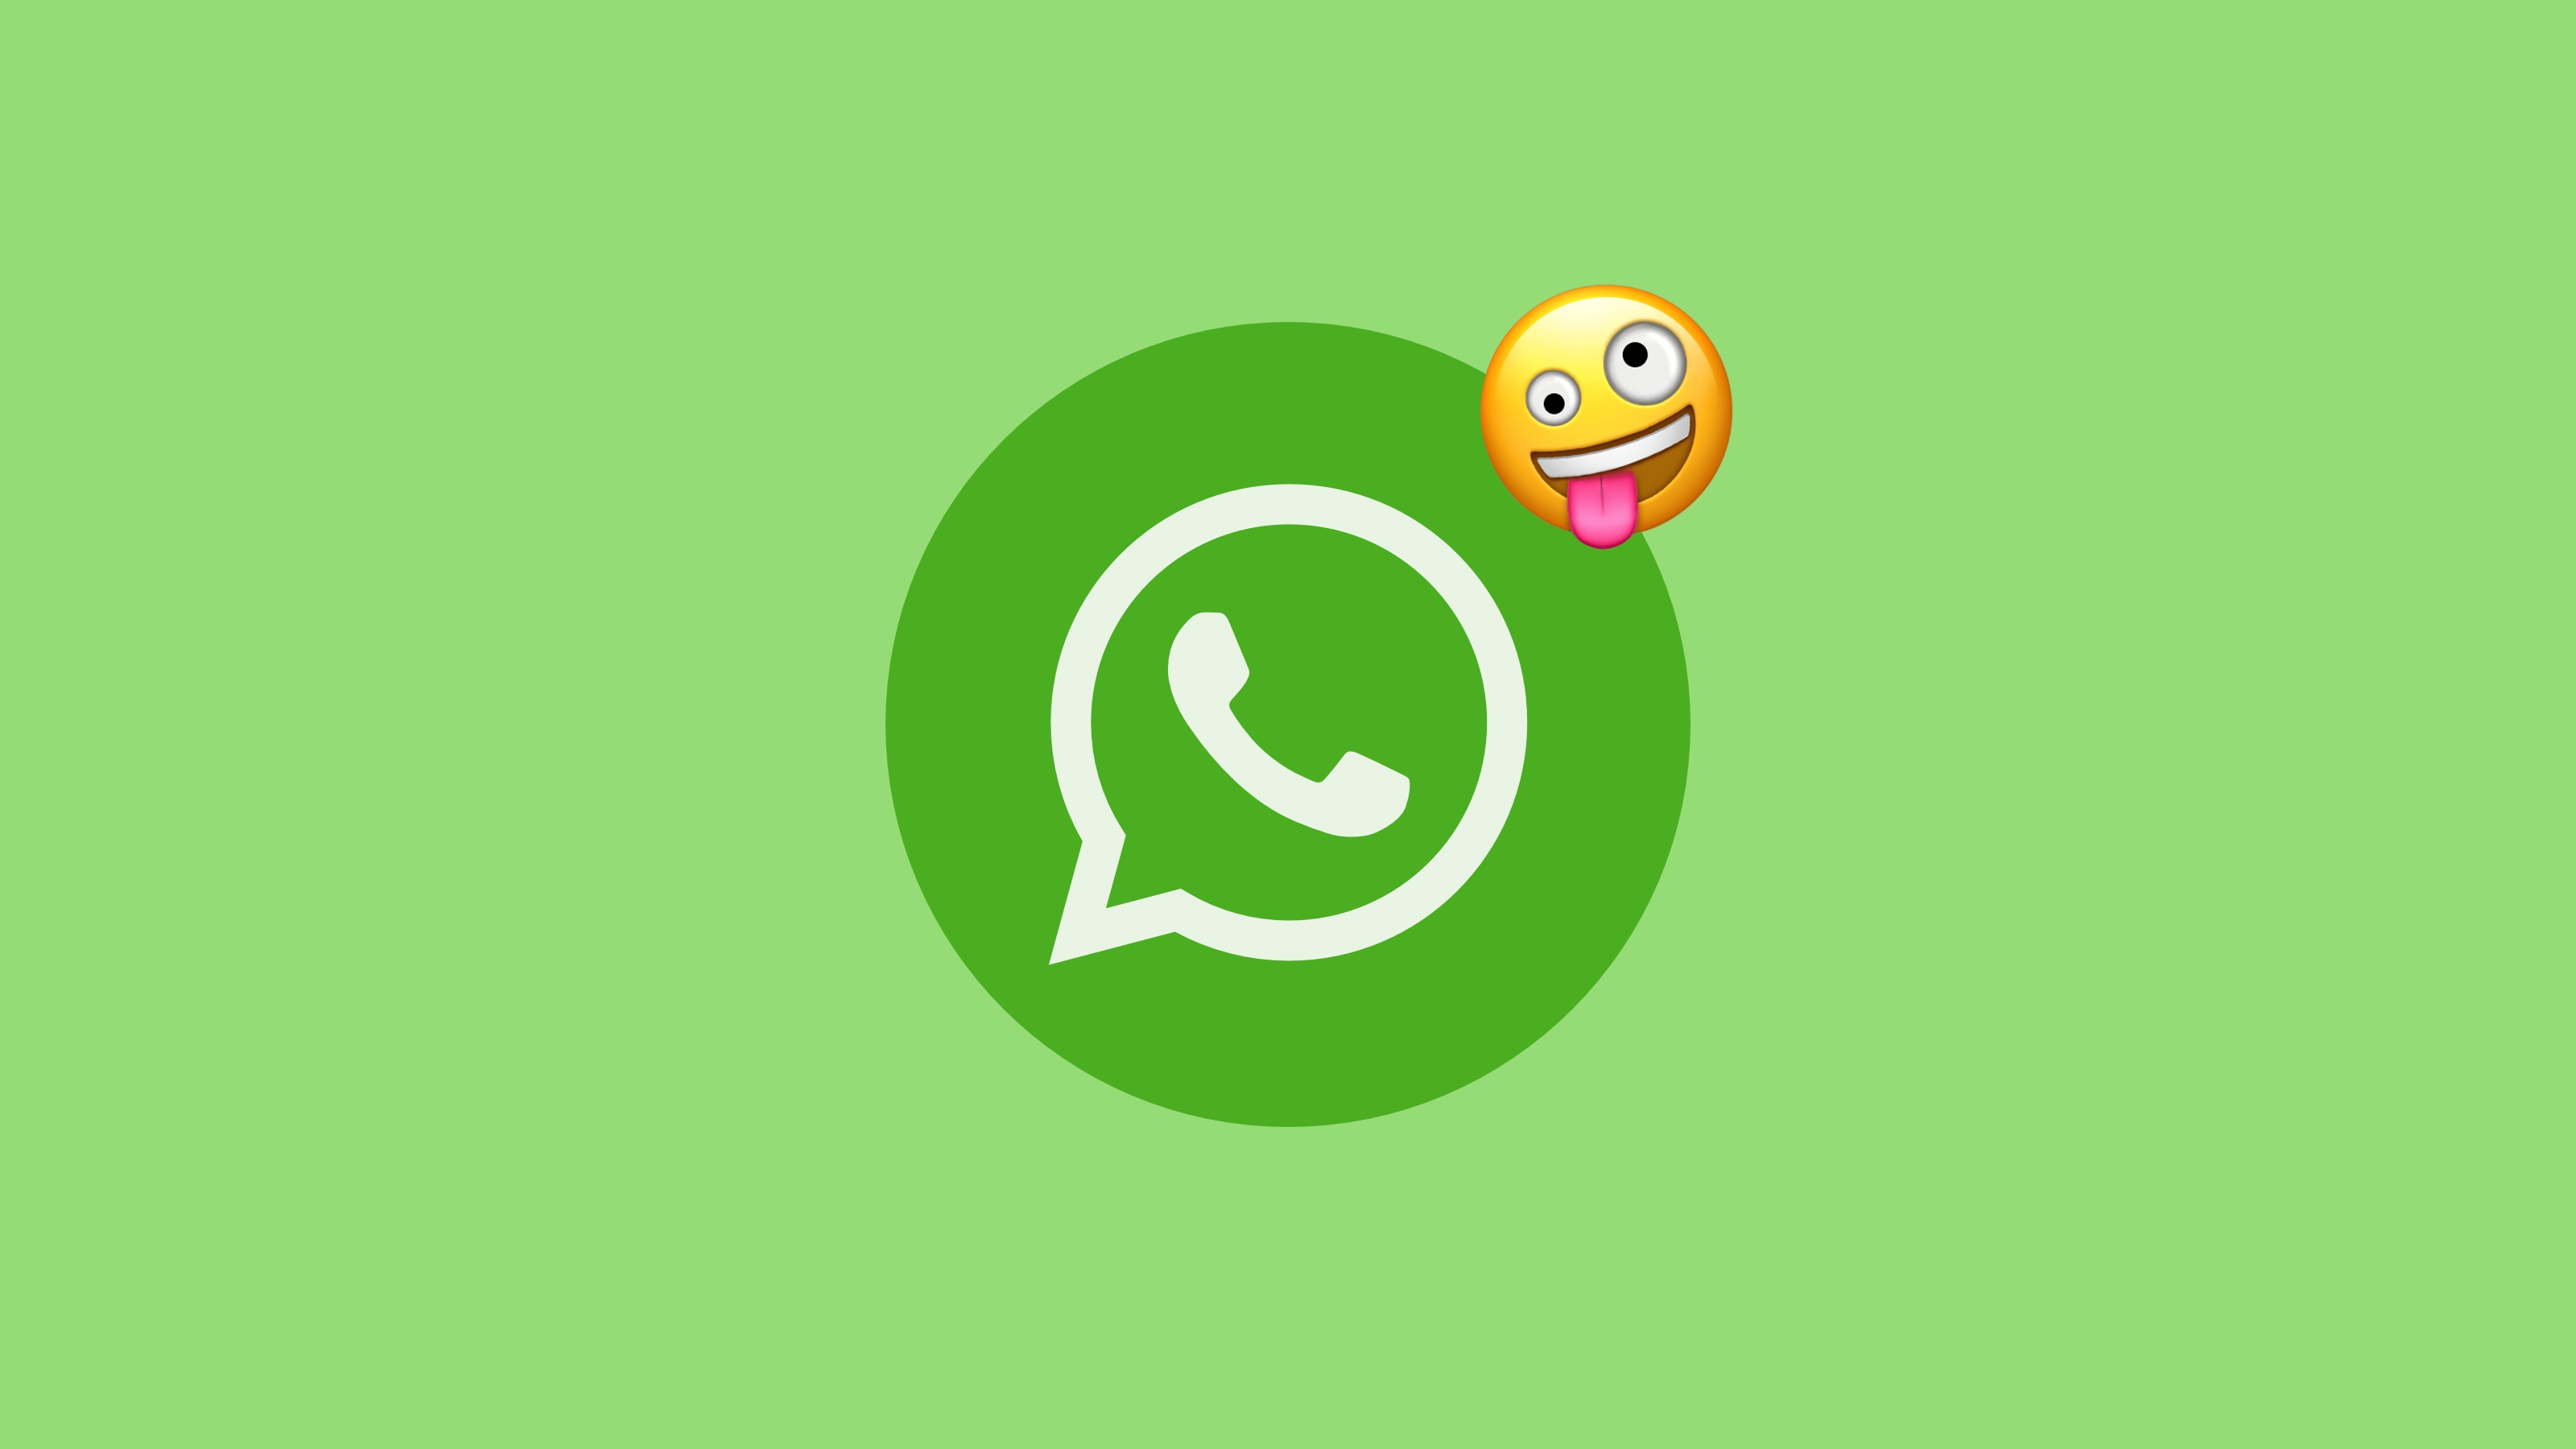 Like iMessage, Facebook Messenger, Instagram and Telegram: WhatsApp will get reactions to messages